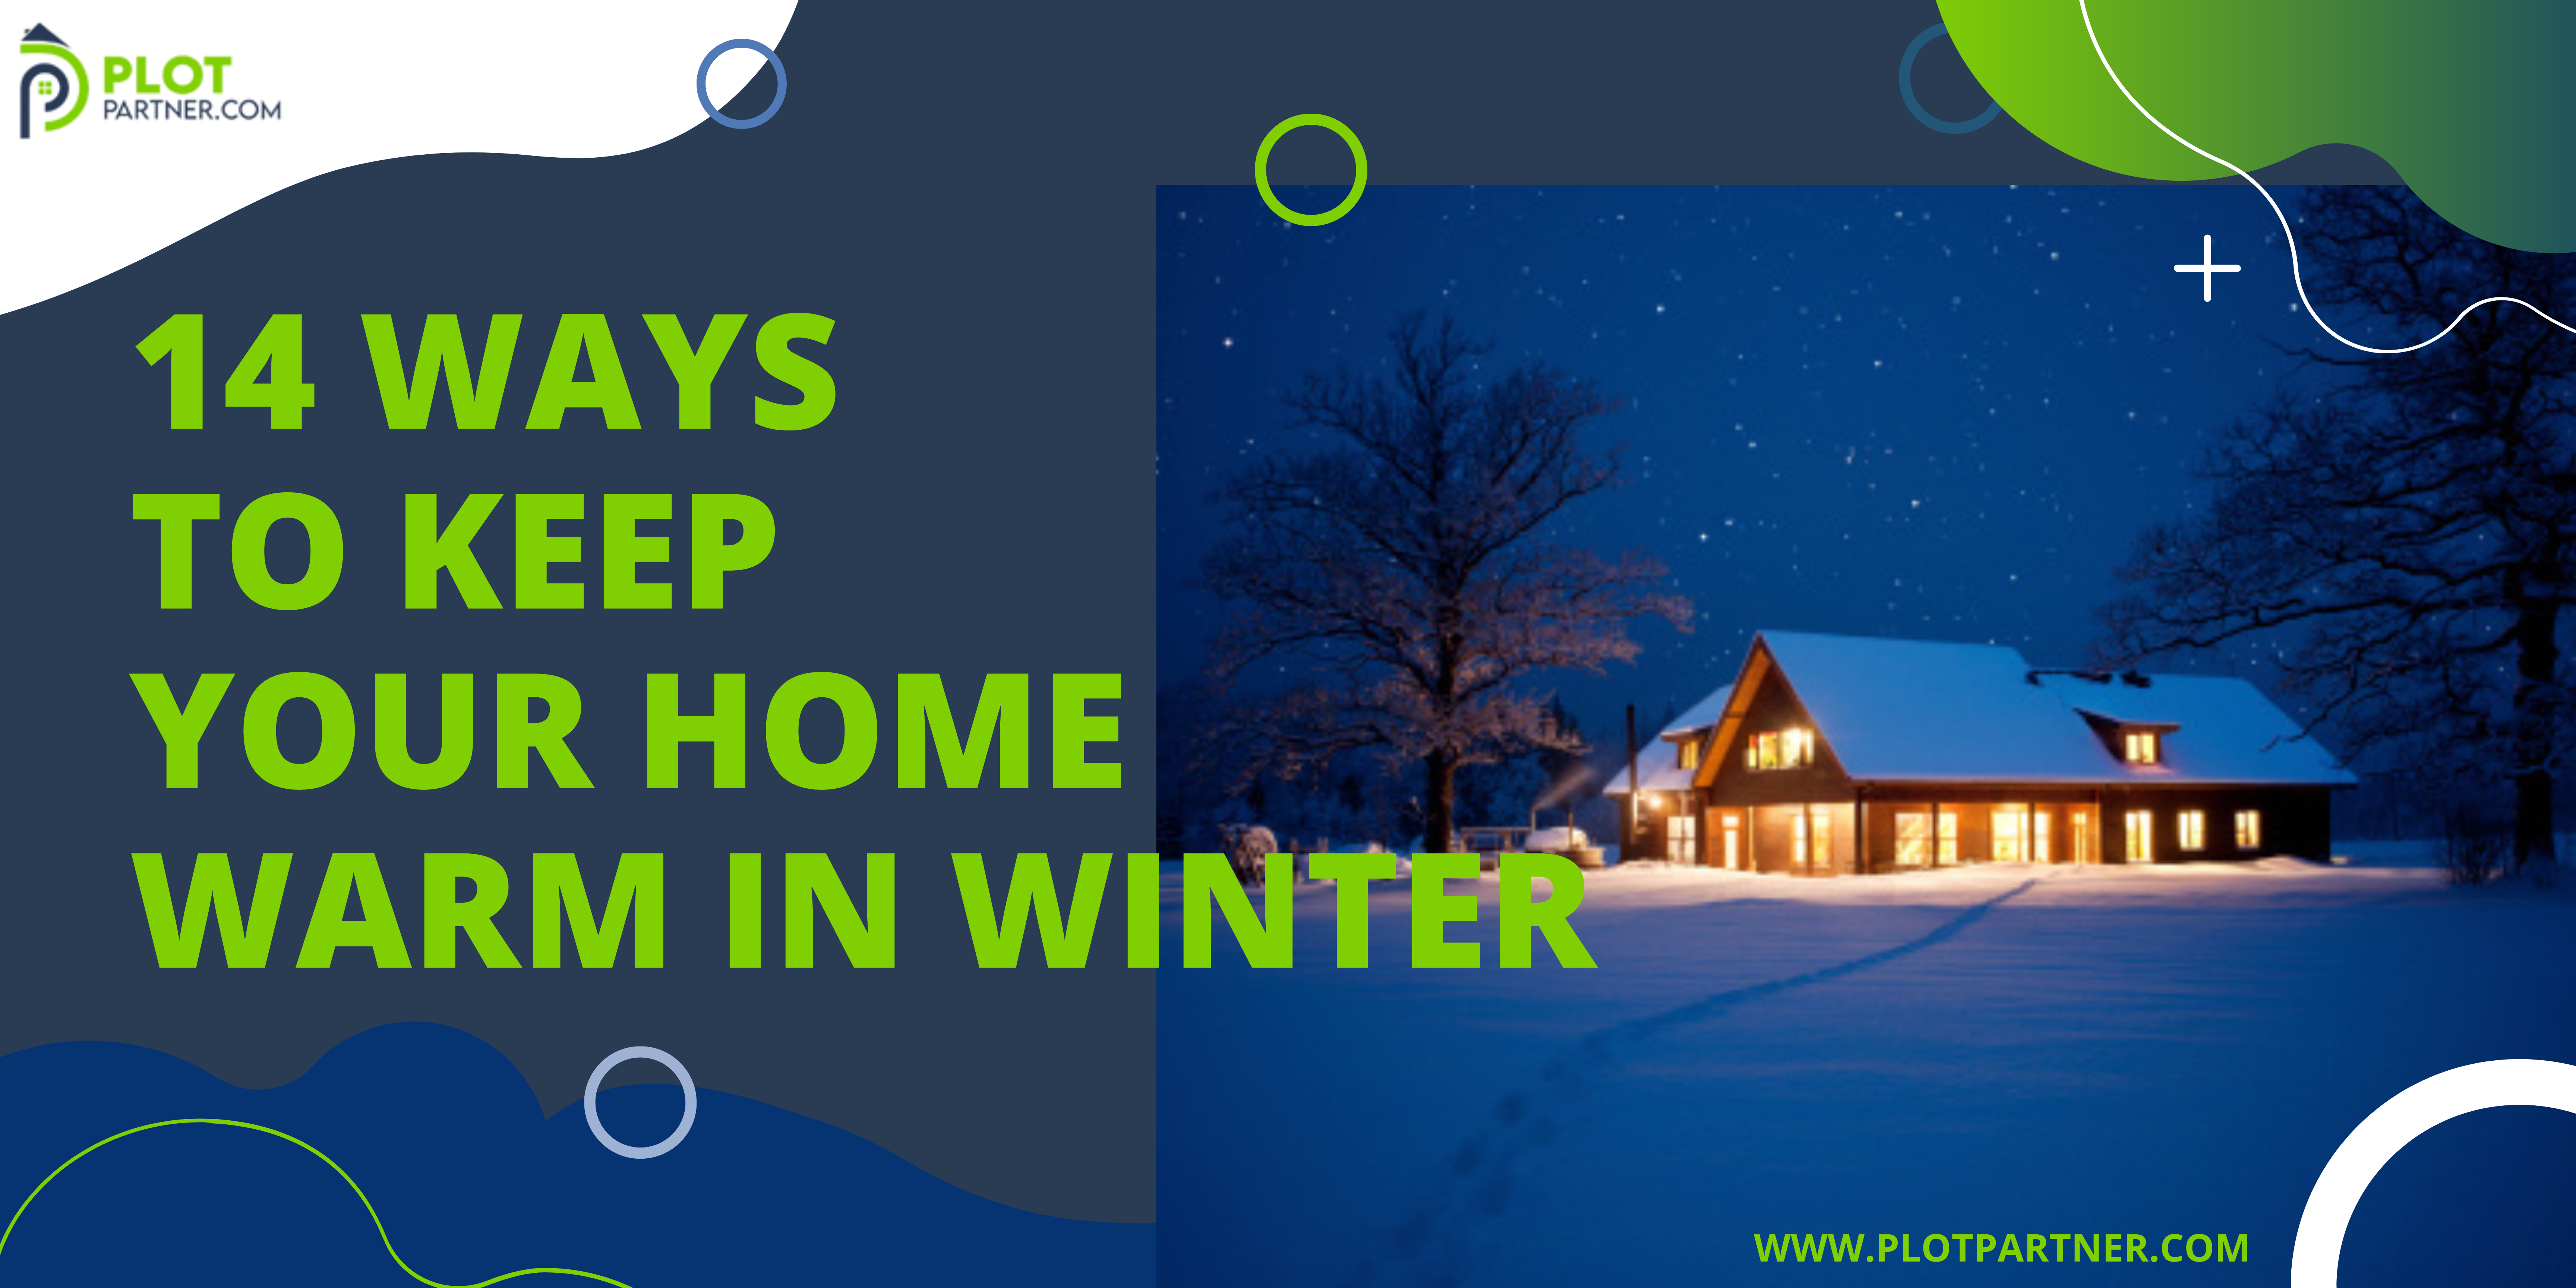 14 Tips to Keep Your Home Warm in Winter for Little Cost | Plot-Partner